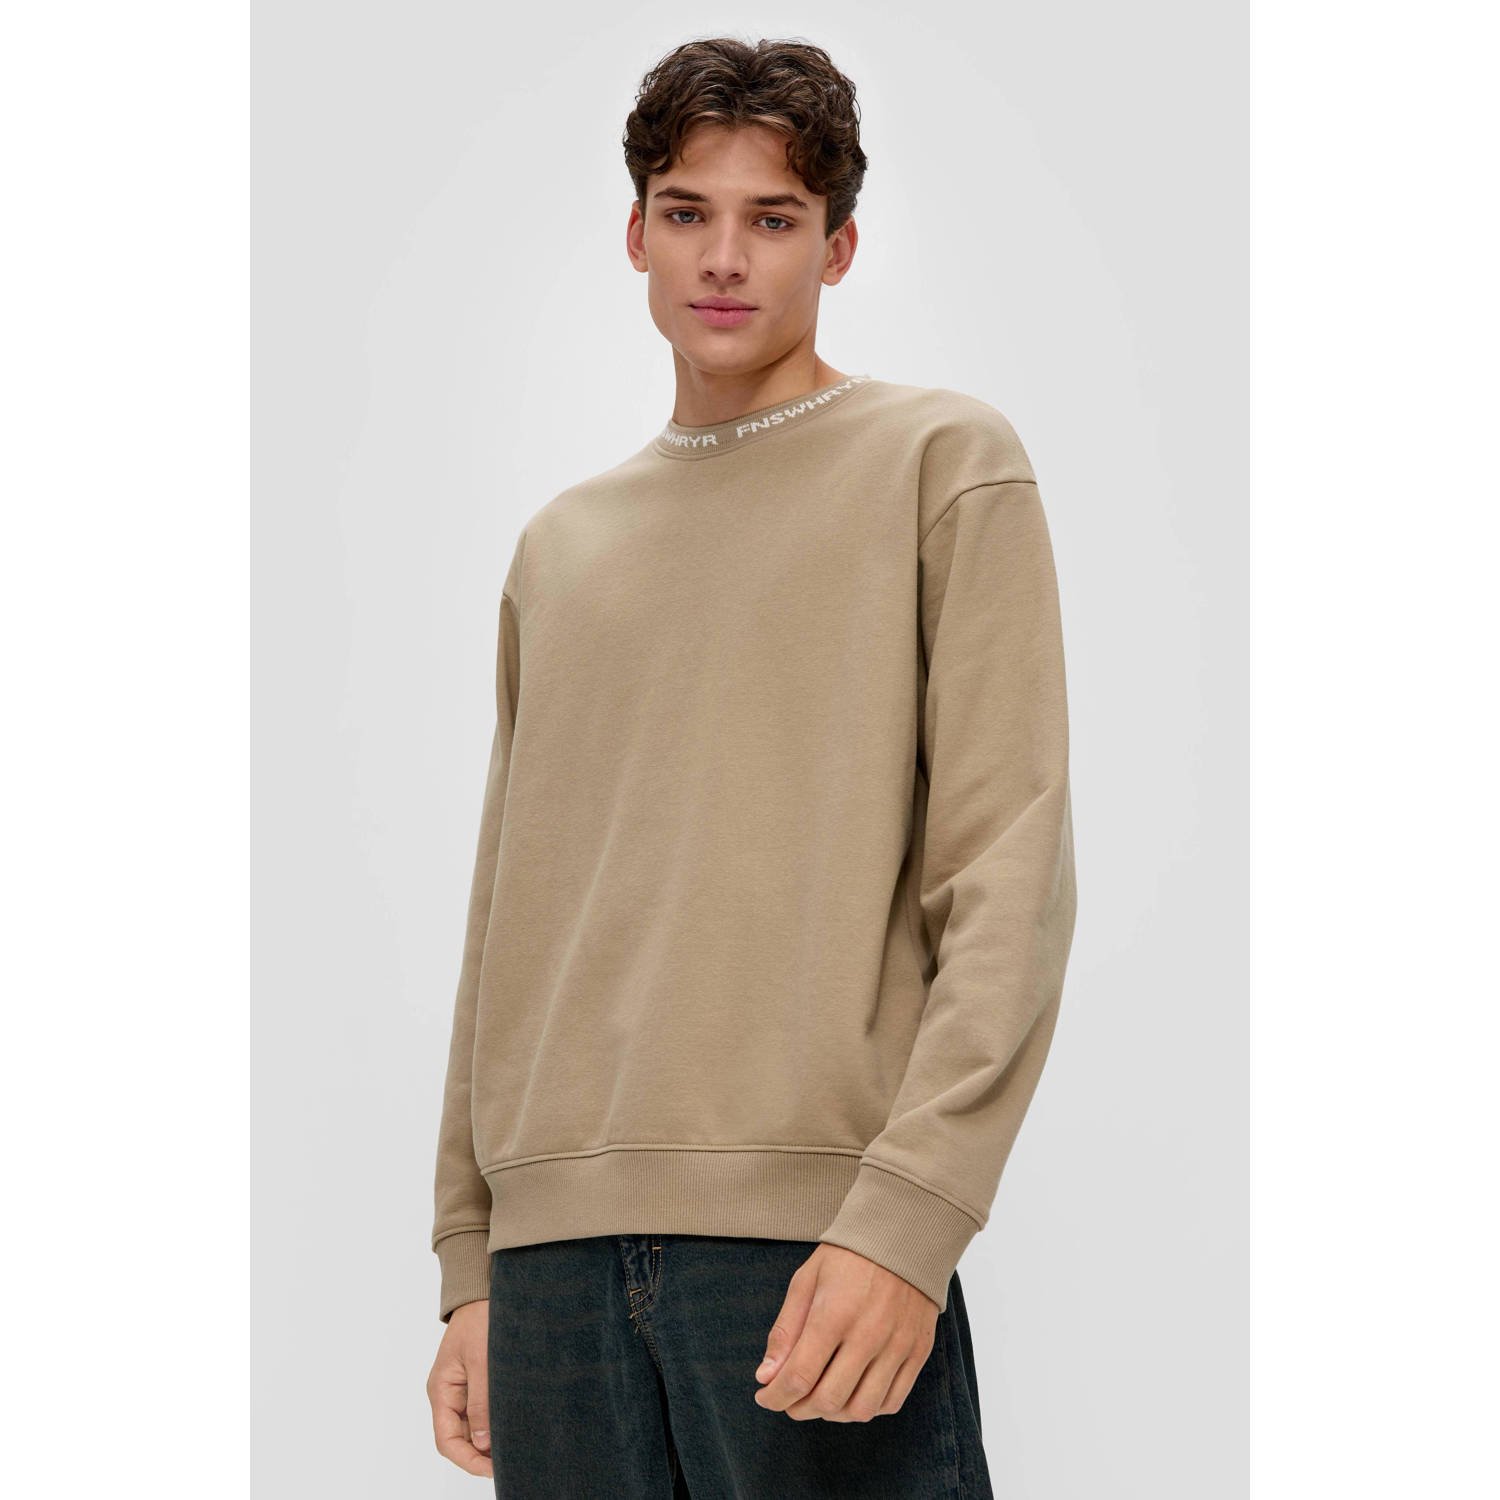 Q S by s.Oliver sweater lichtbruin